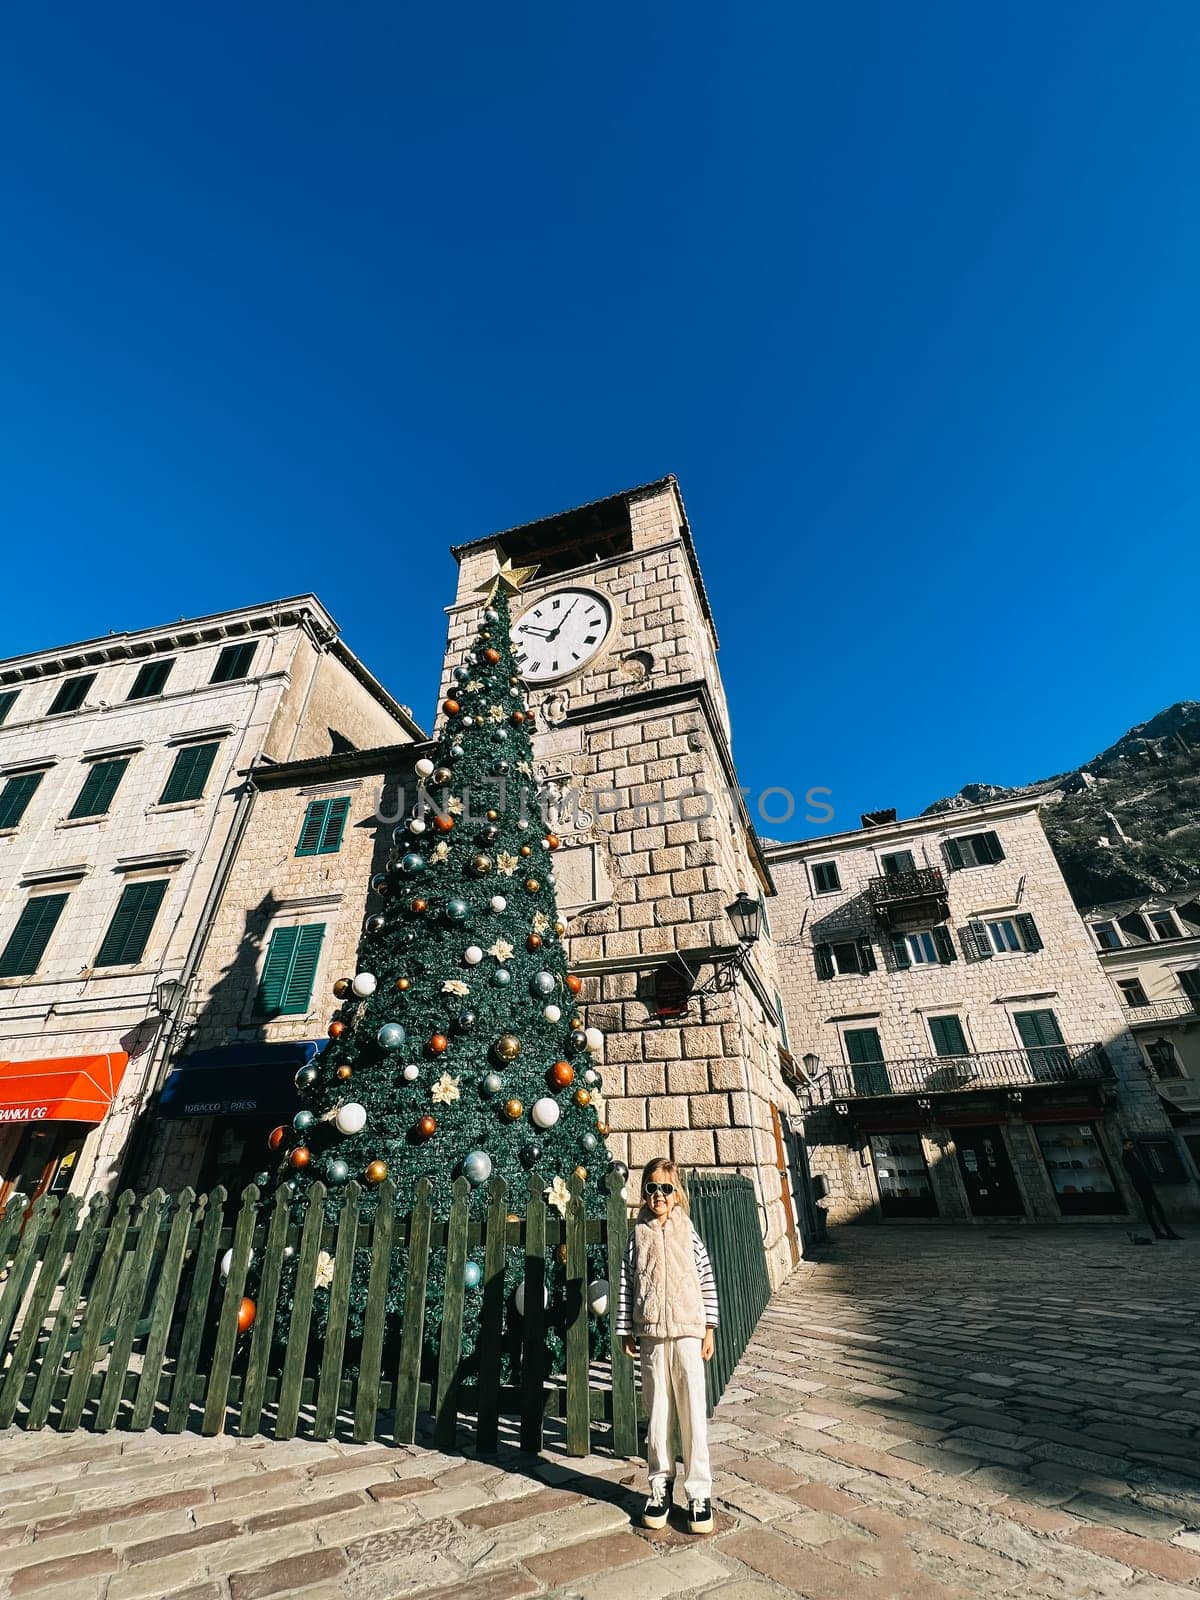 Little girl stands near a Christmas tree in front of an ancient building with a clock by Nadtochiy